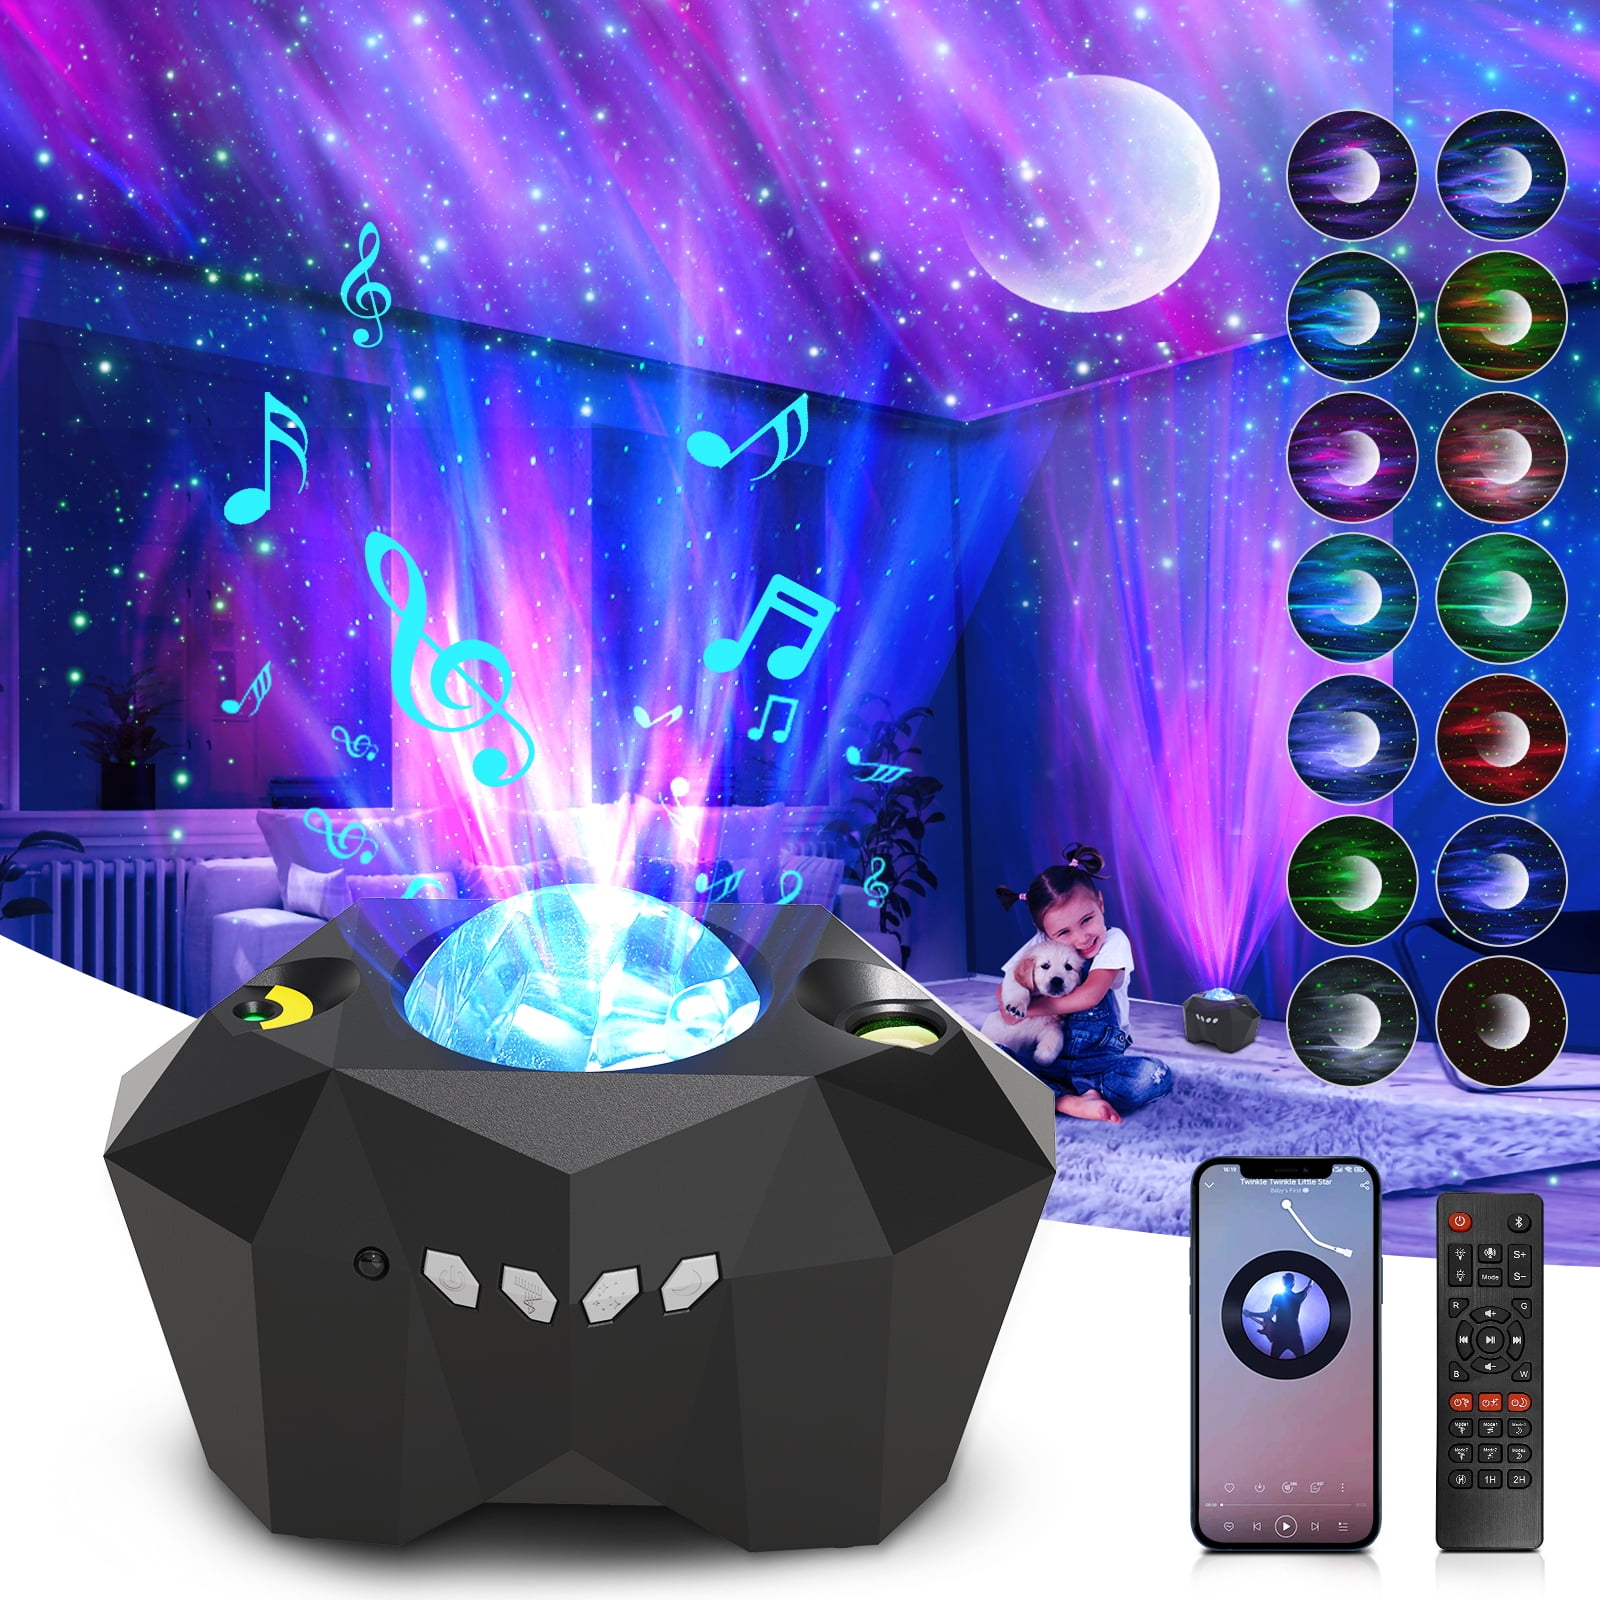 Galaxy Projector, Star Moon Projector w/ Remote Control, 55 Lighting  Effects Night Light Projector With Time Function Build-in Bluetooth Speaker  for Adult Kids Party Bedroom Skylight Game Home Decor 